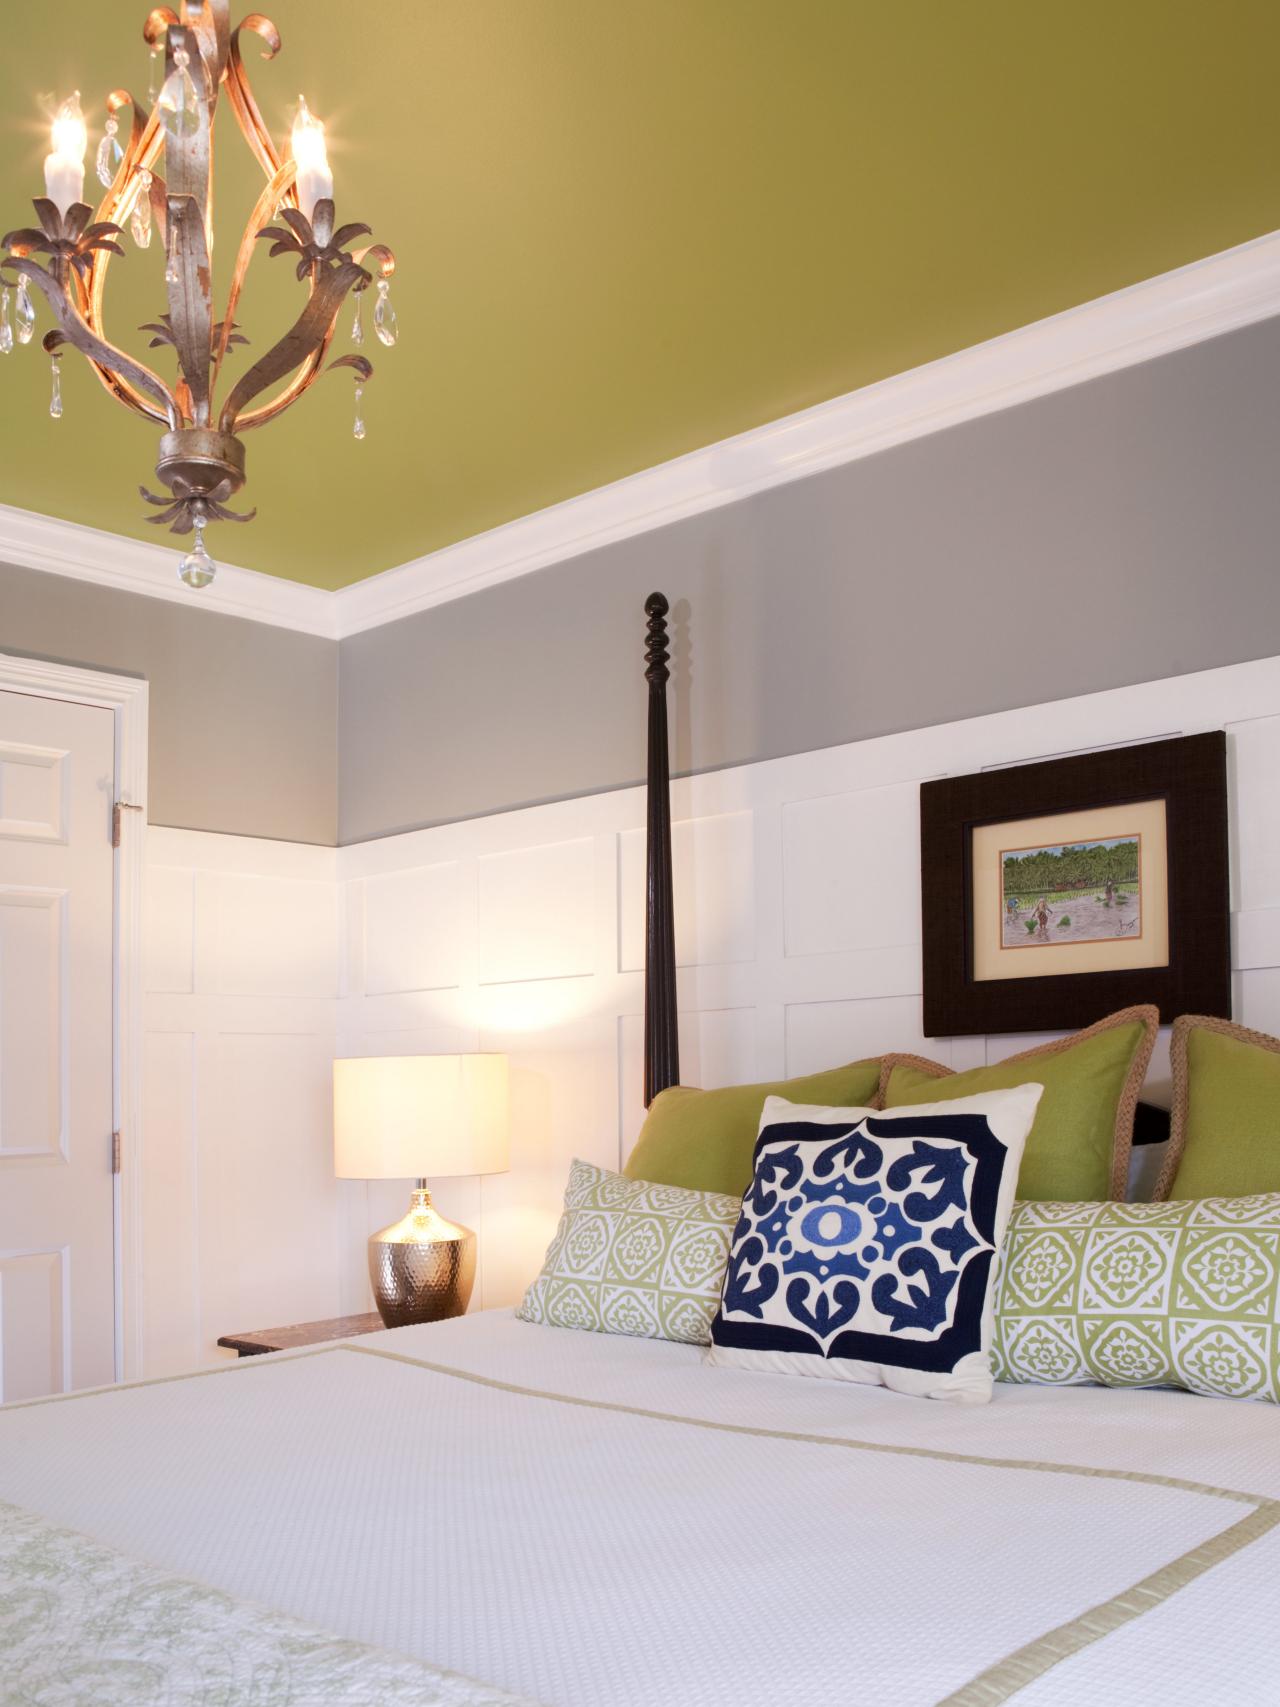 Bedroom Wall Color Schemes: Pictures, Options & Ideas | HGTV